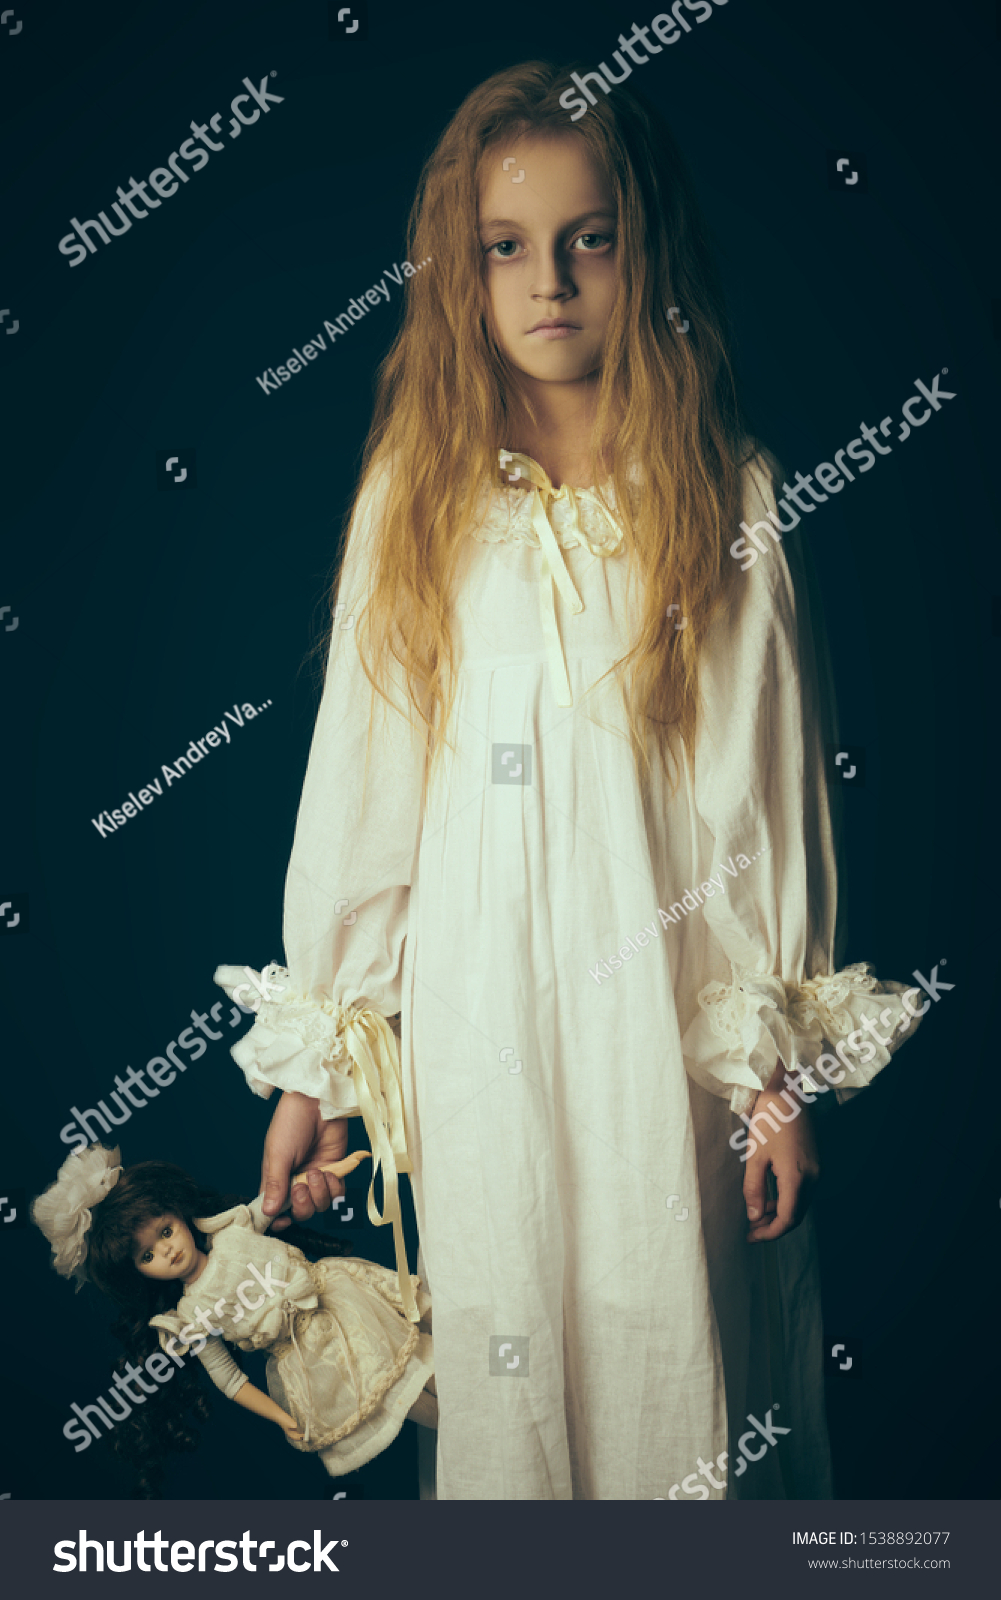 Scary little girl ghost in a white nightgown holds her doll. Black background. Halloween.  #1538892077